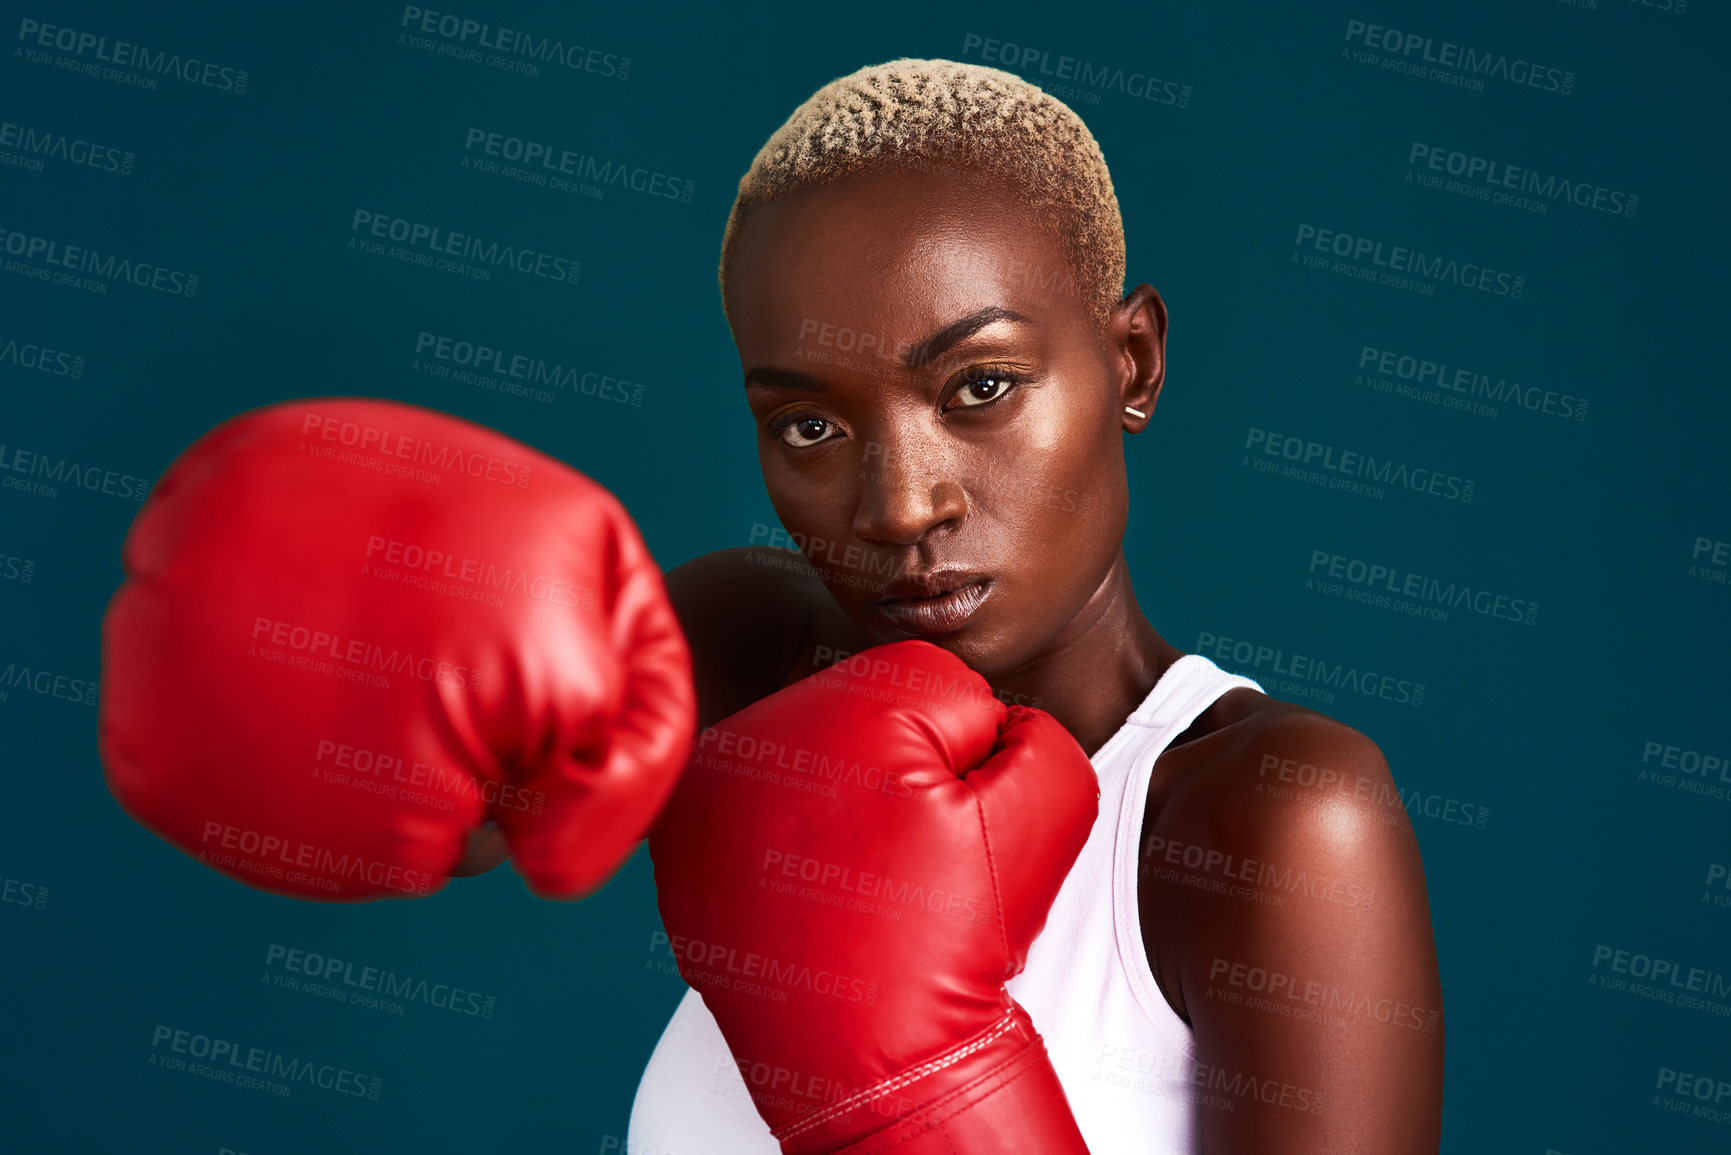 Buy stock photo Cropped portrait of an attractive young female boxer working out against a dark background in the studio